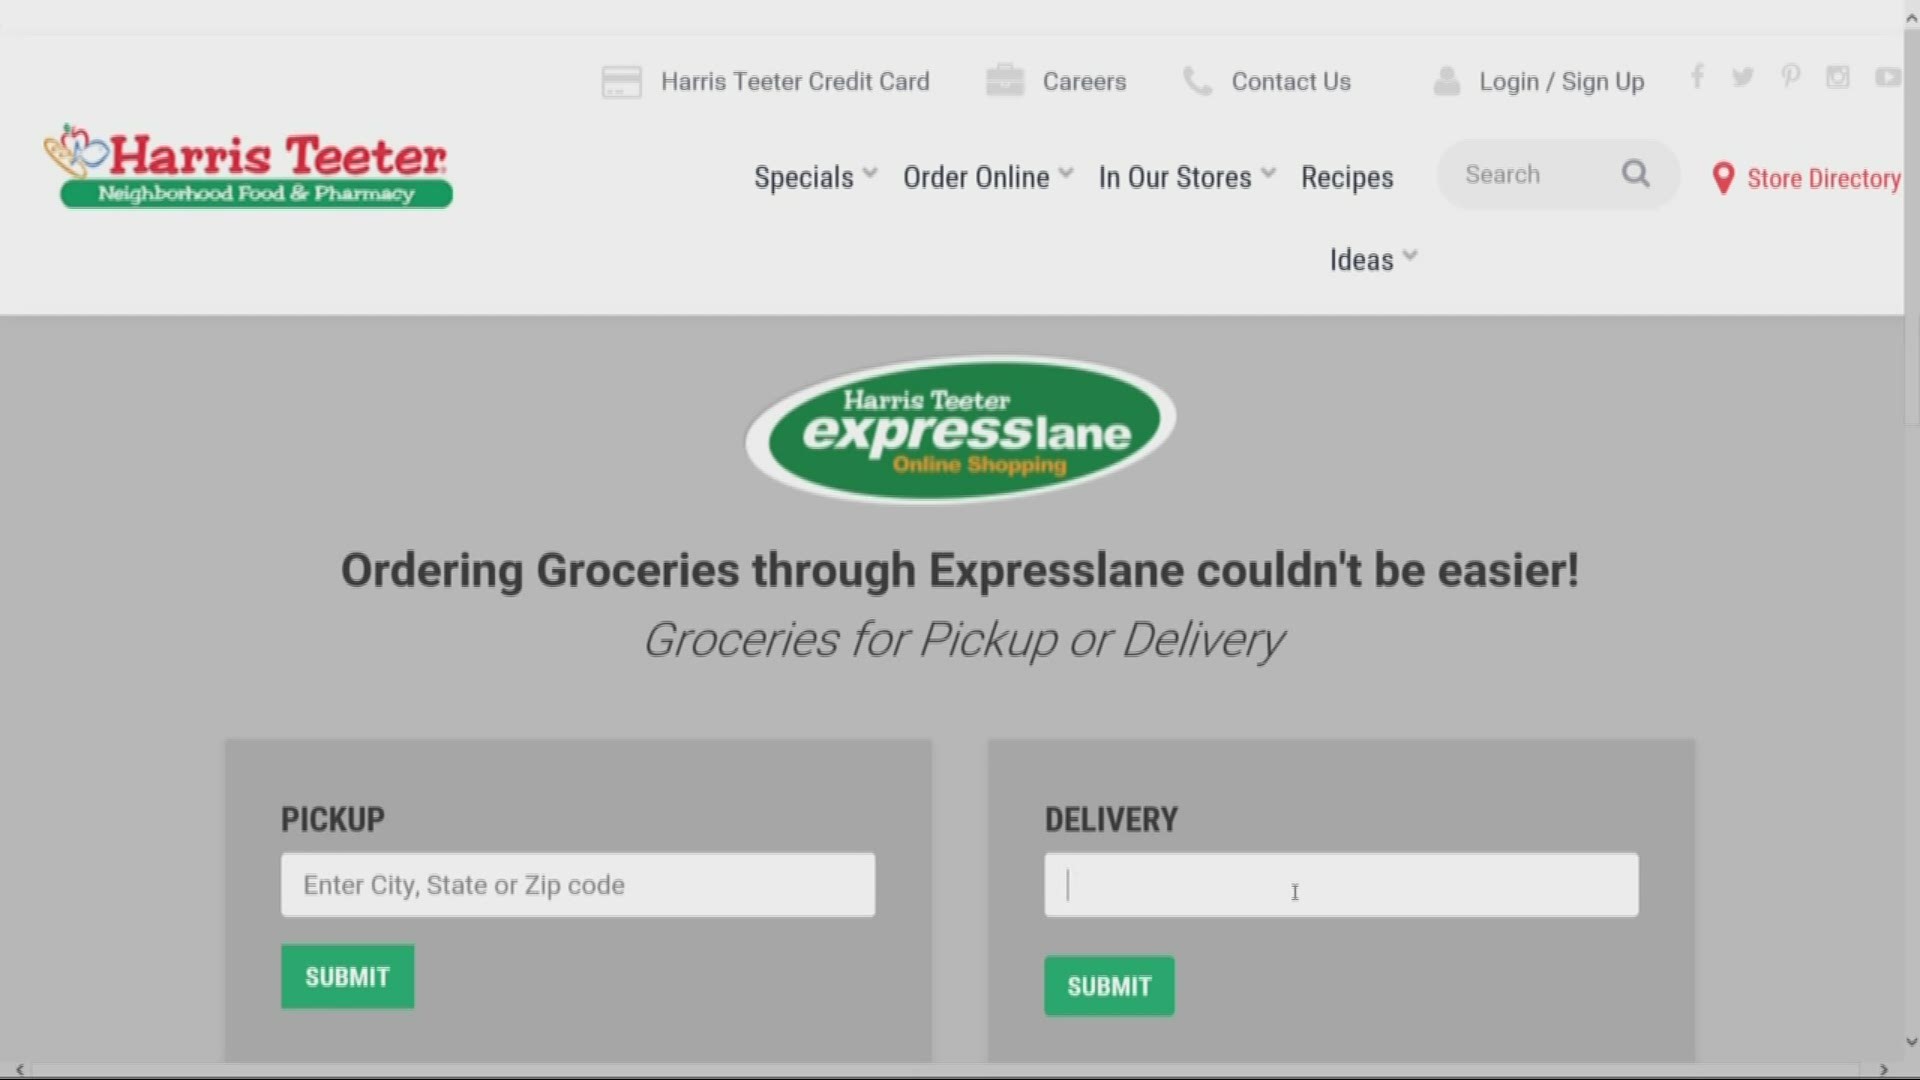 They're fast, convenient and you don't even have to leave the house. But which store has the best grocery delivery service?